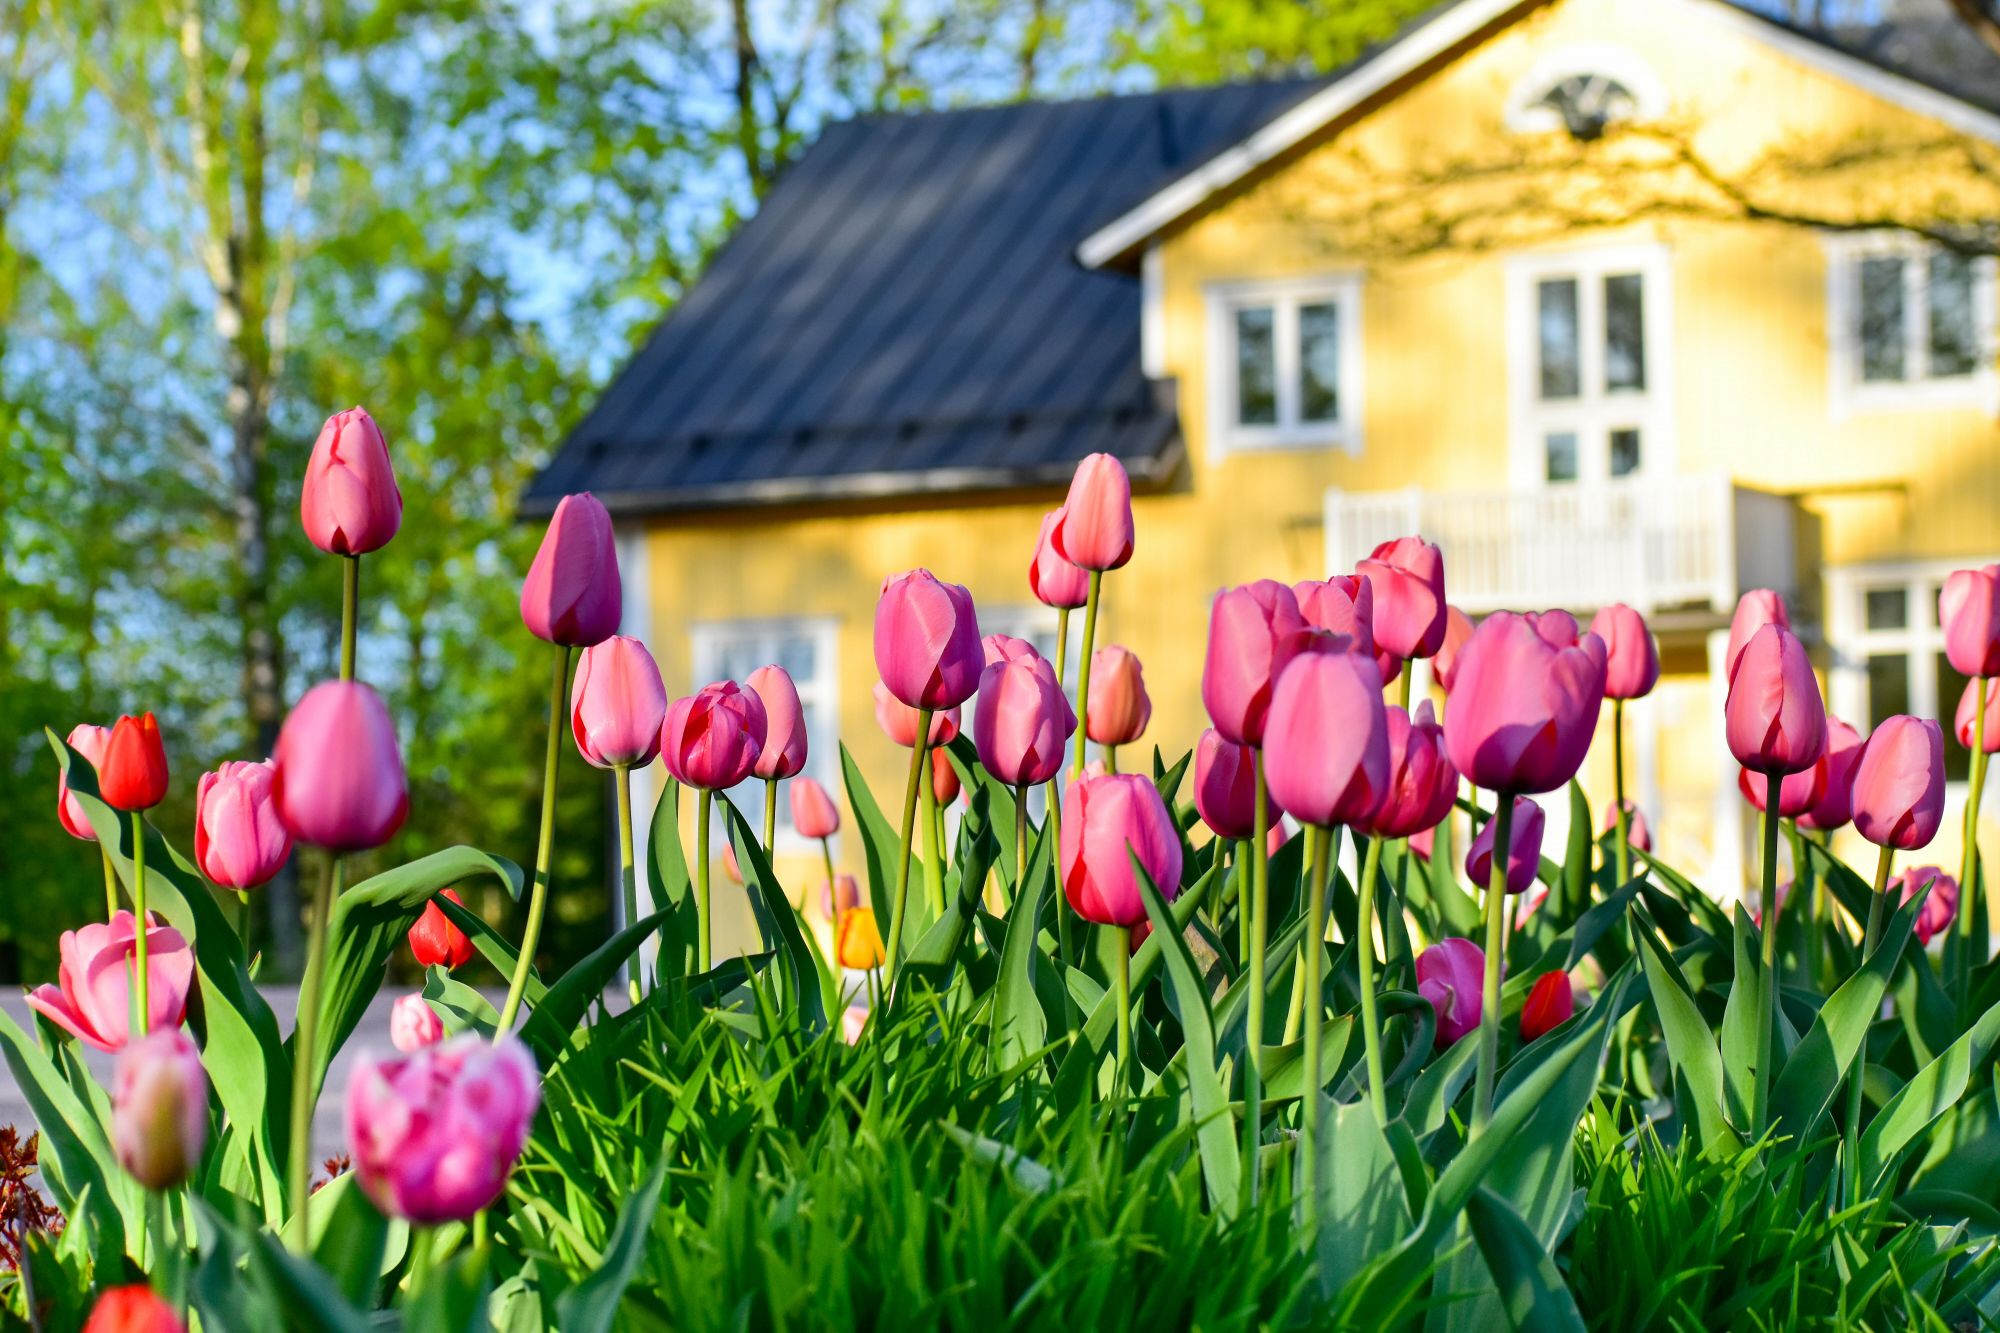 Tulips planted in front of a house